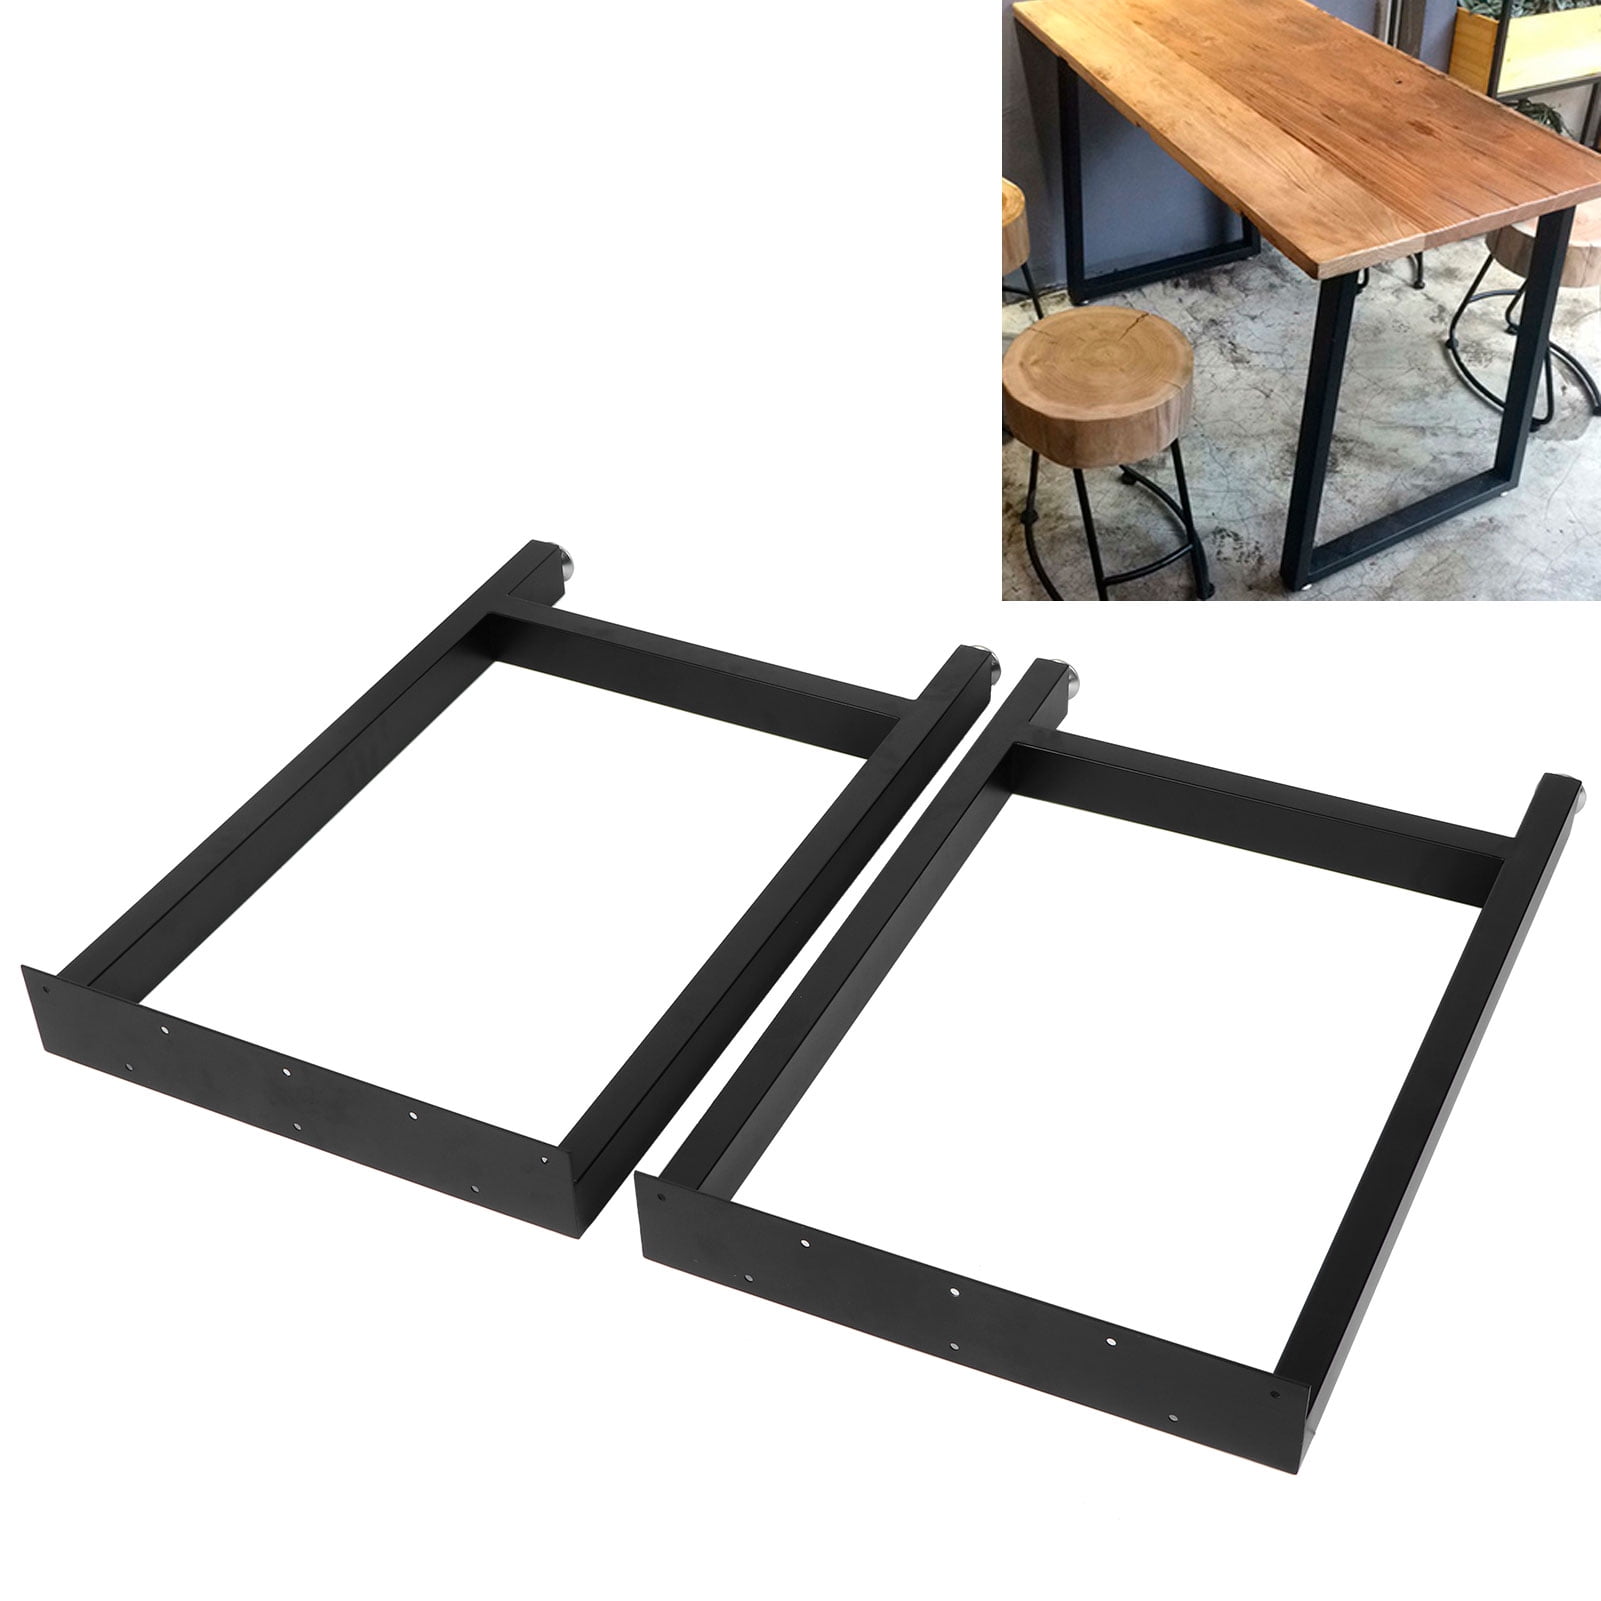 Details about   Metal Table Legs Dining Table,Adjustable Coffee Table Legs,Desk Legs Set of 2 